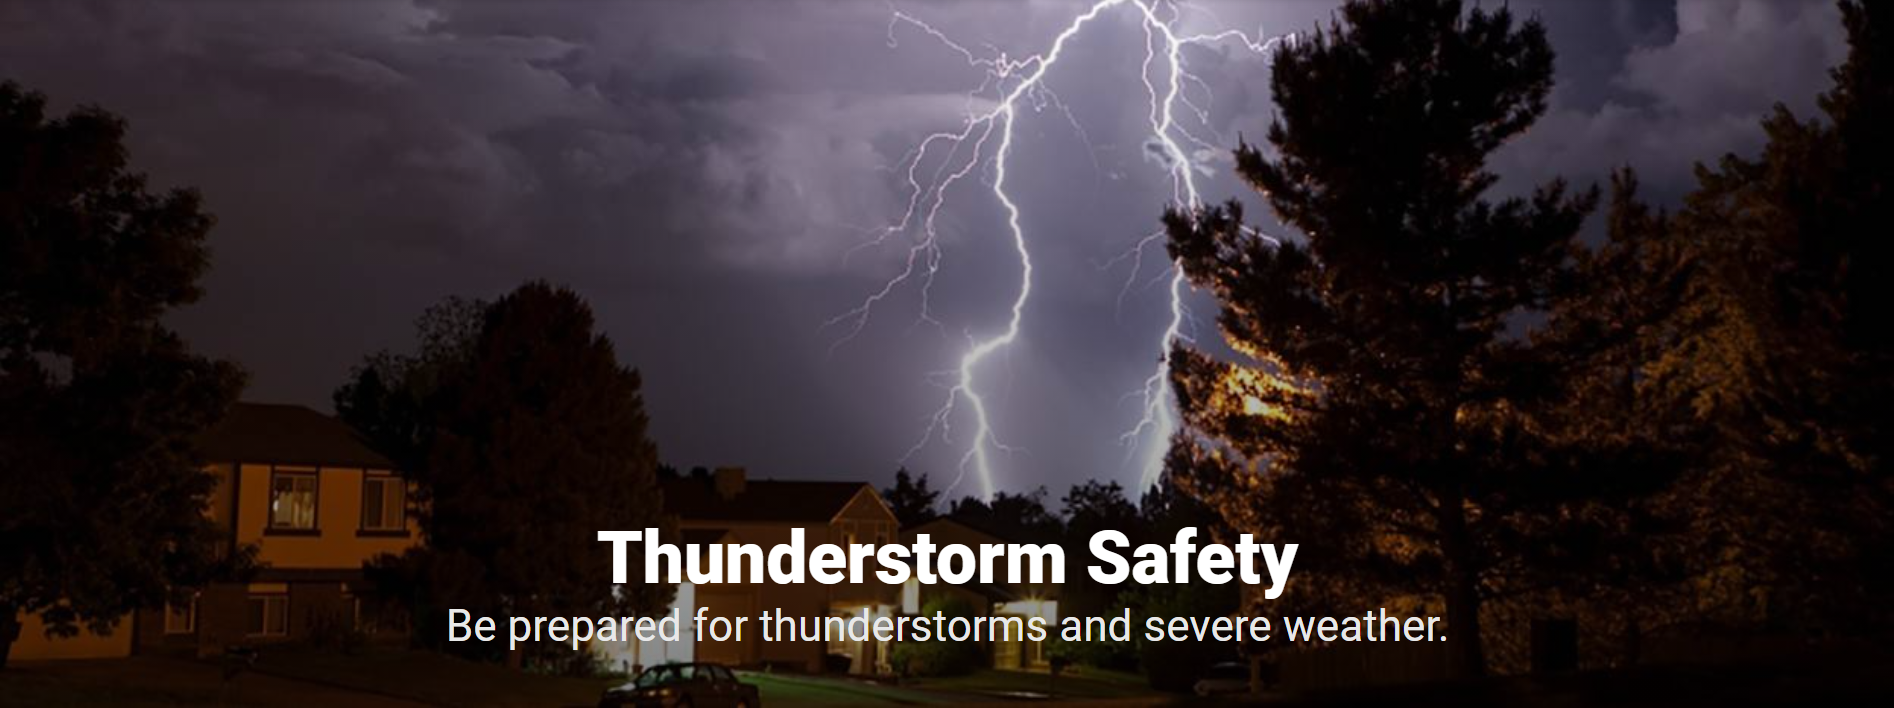 How to Stay Safe in a Thunderstorm